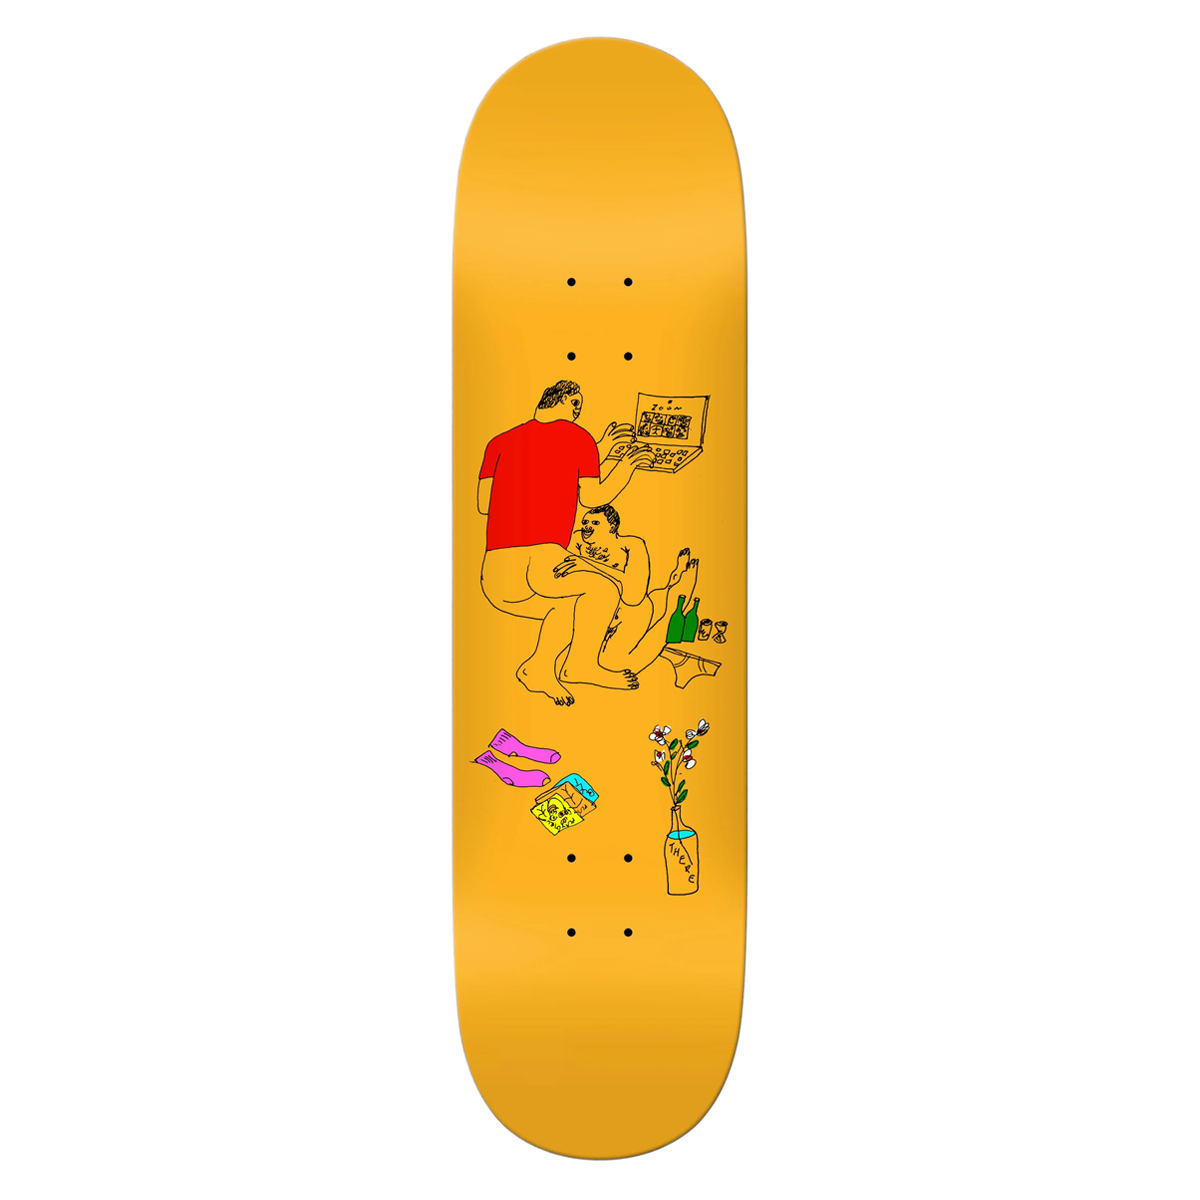 There Board Meeting Skate Deck - 8.25